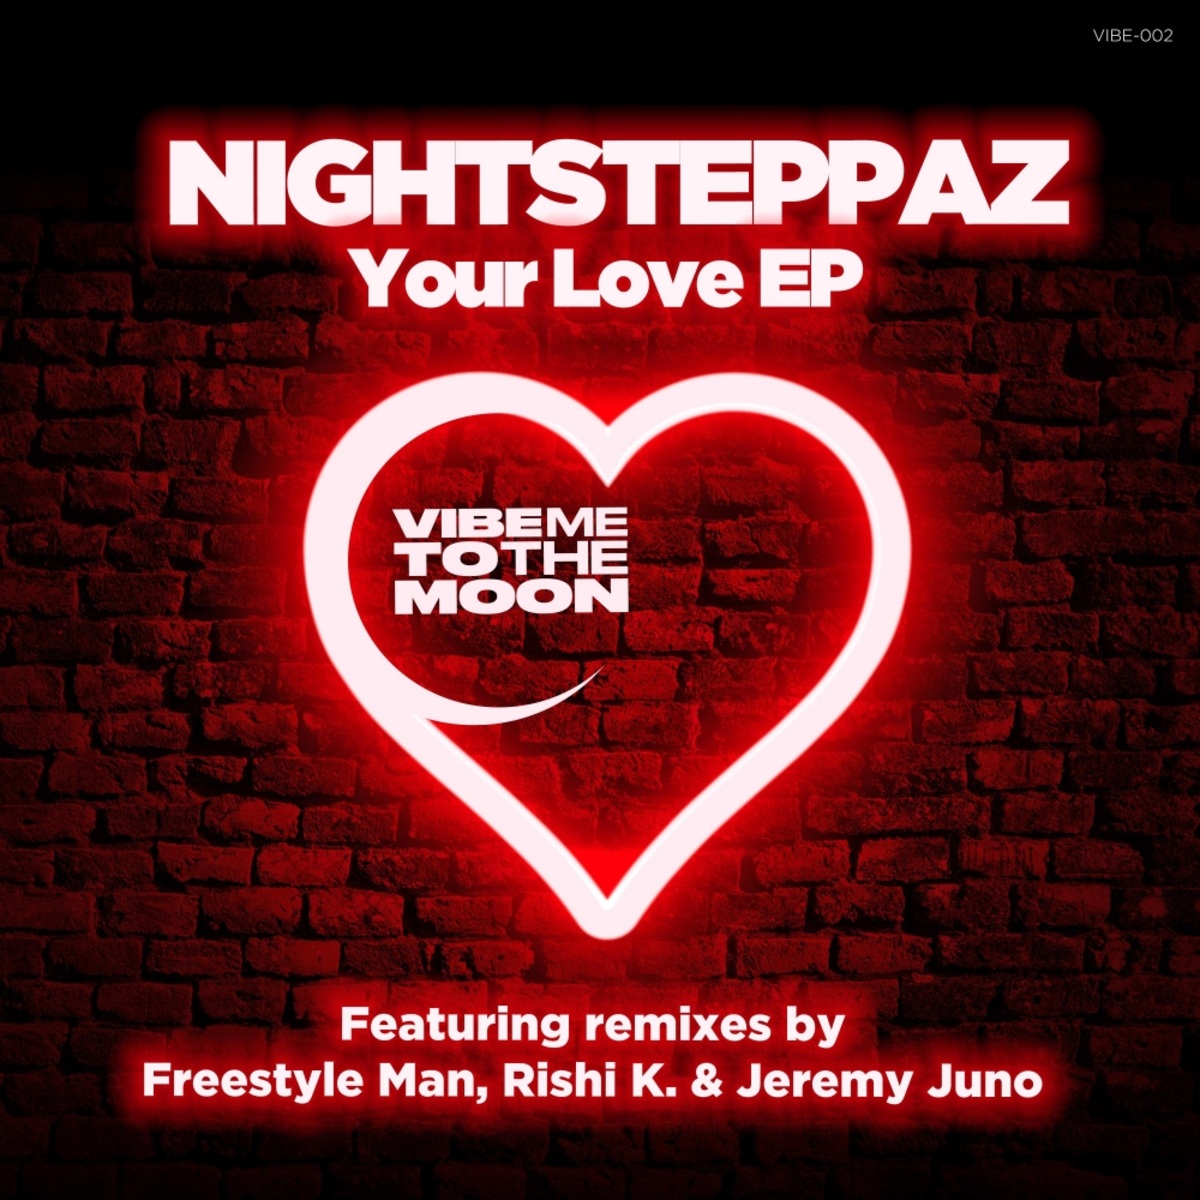 Nightsteppaz - Your Love EP / Vibe Me To The Moon